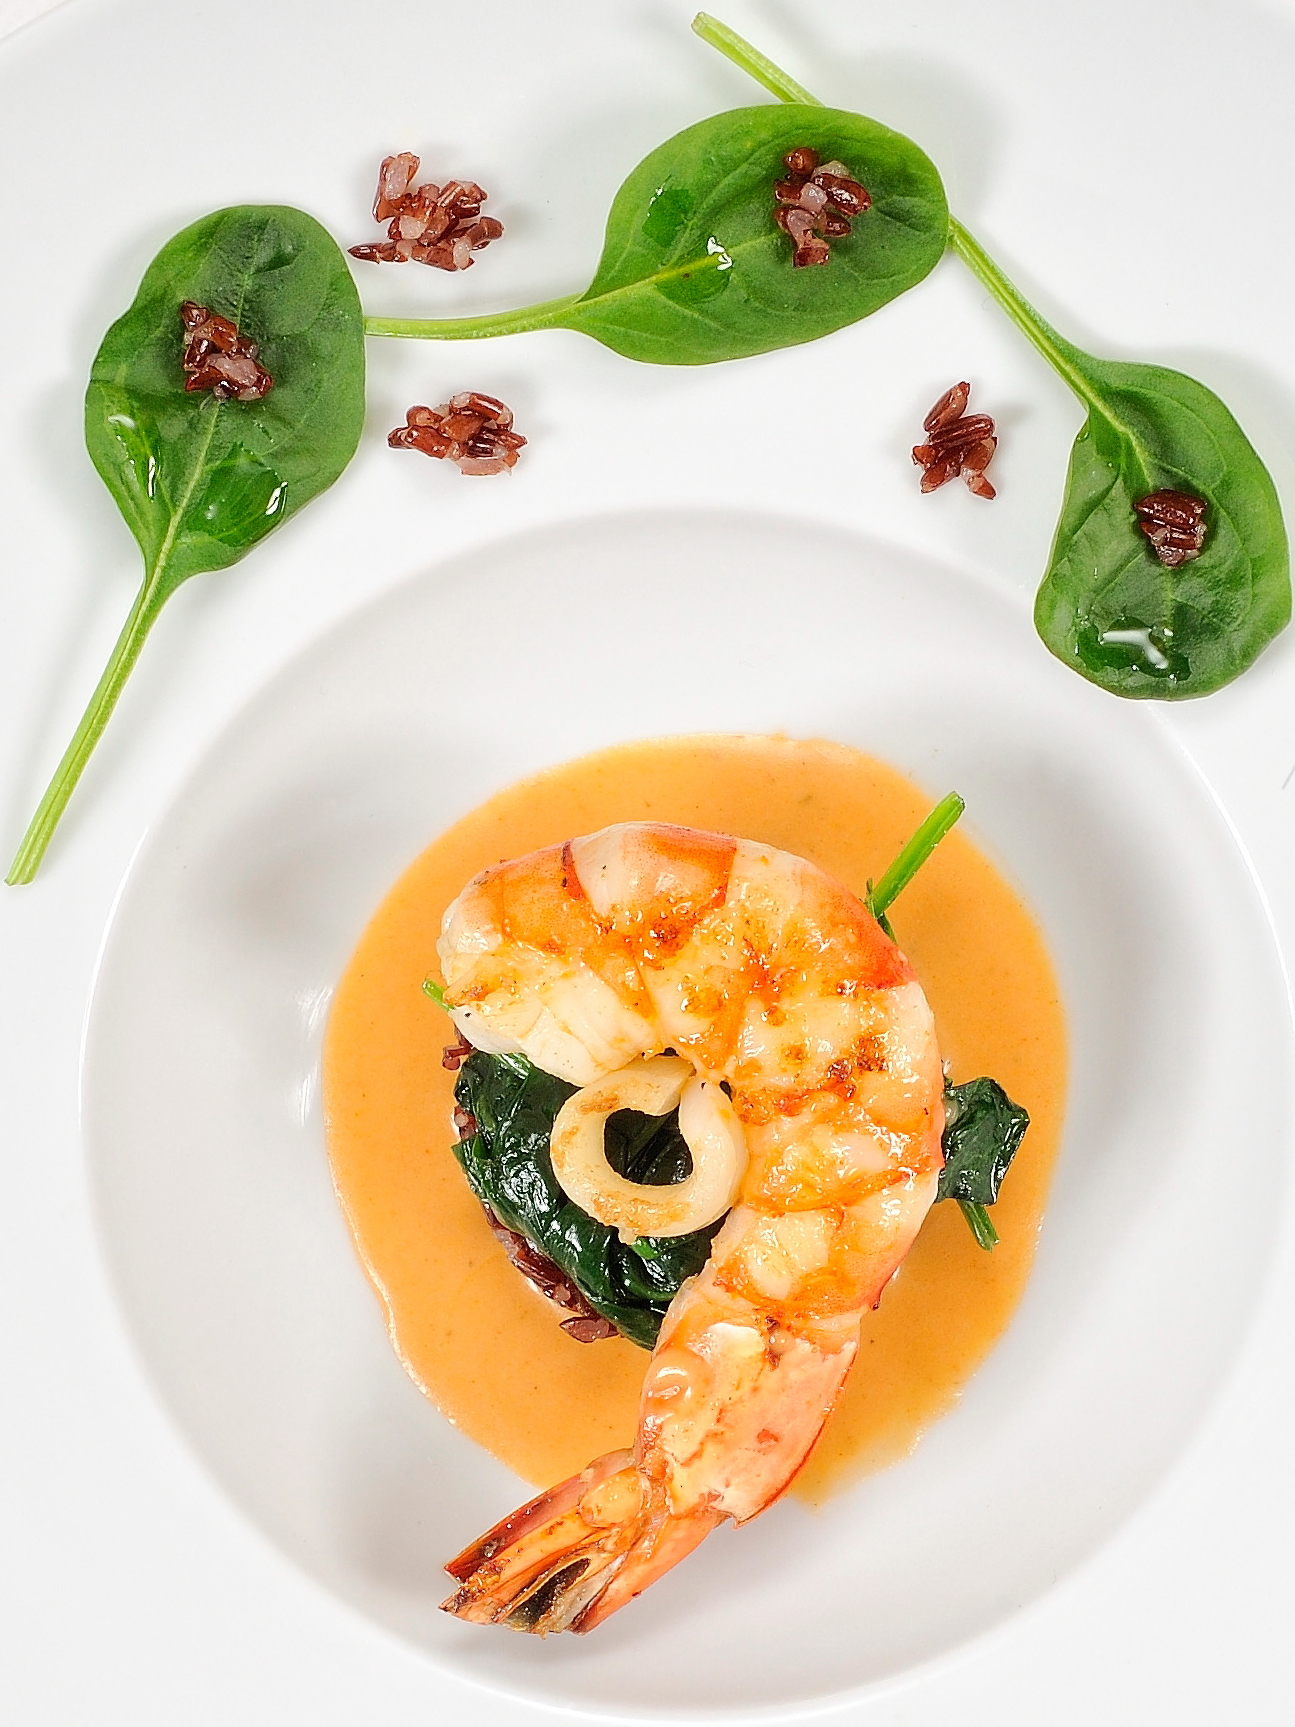 Shrimp in lobster sauce perfumed with tarragon, red rice and baby spinach. Click to enlarge.